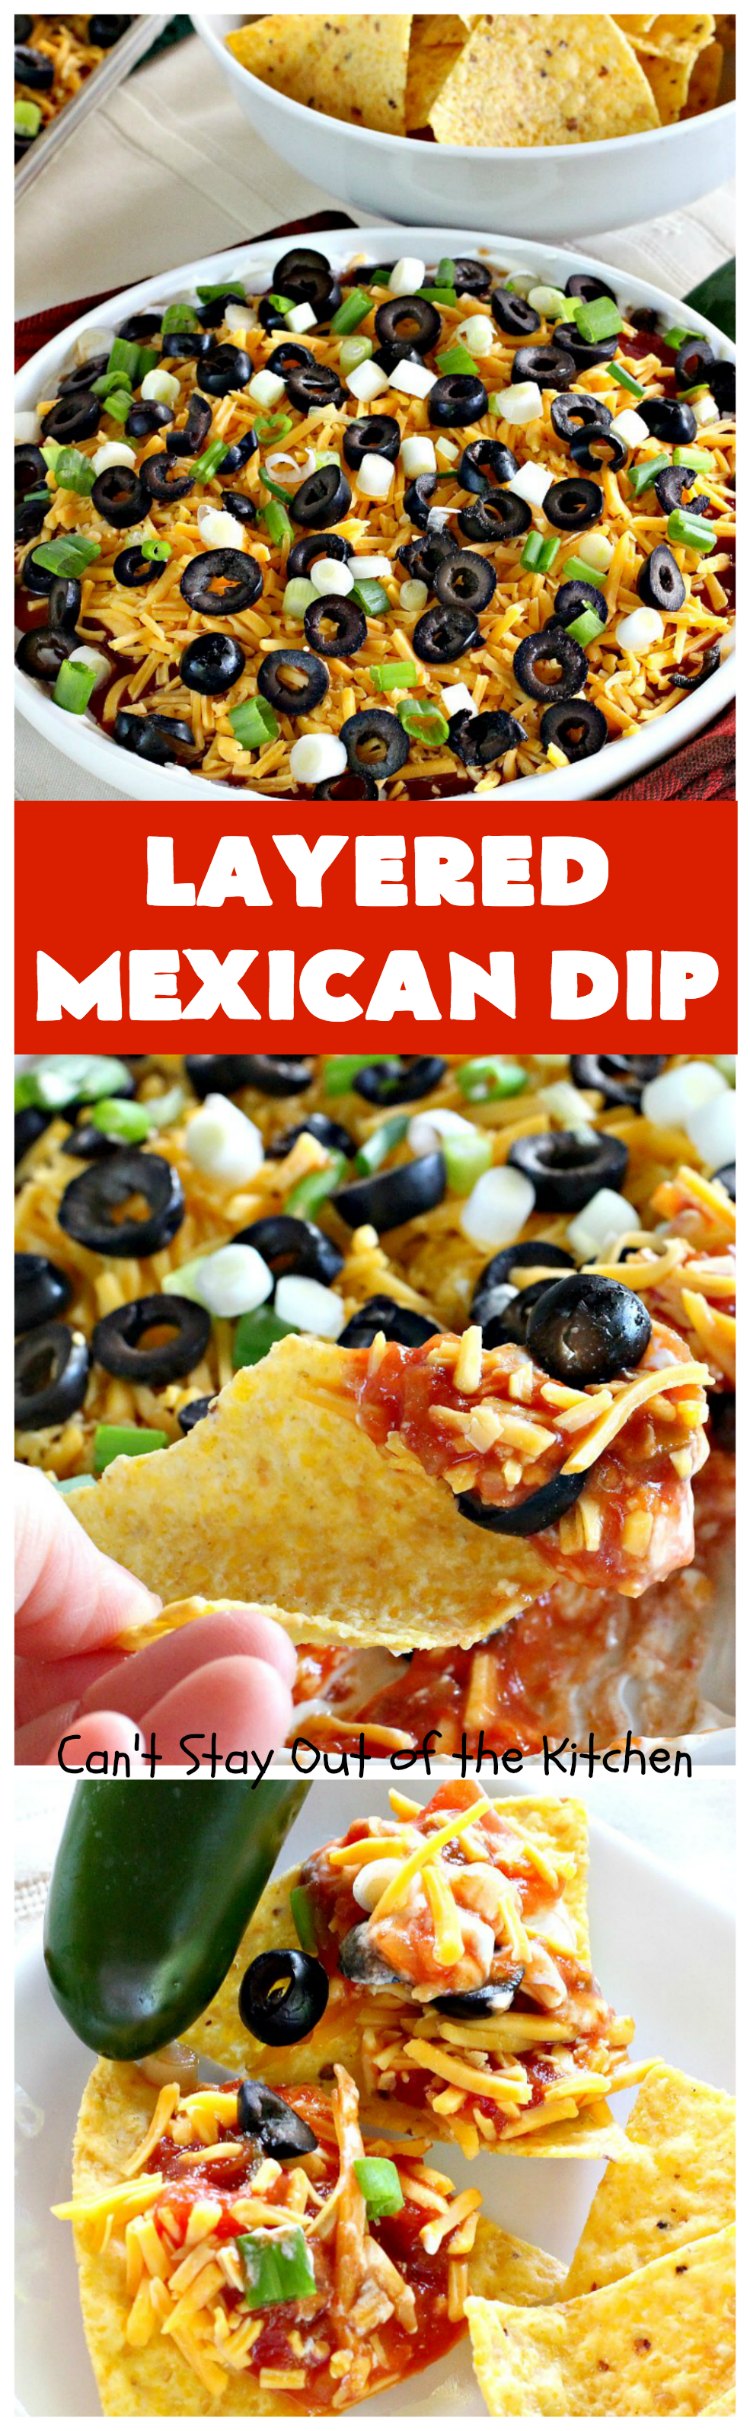 Layered Mexican Dip | Can't Stay Out of the Kitchen